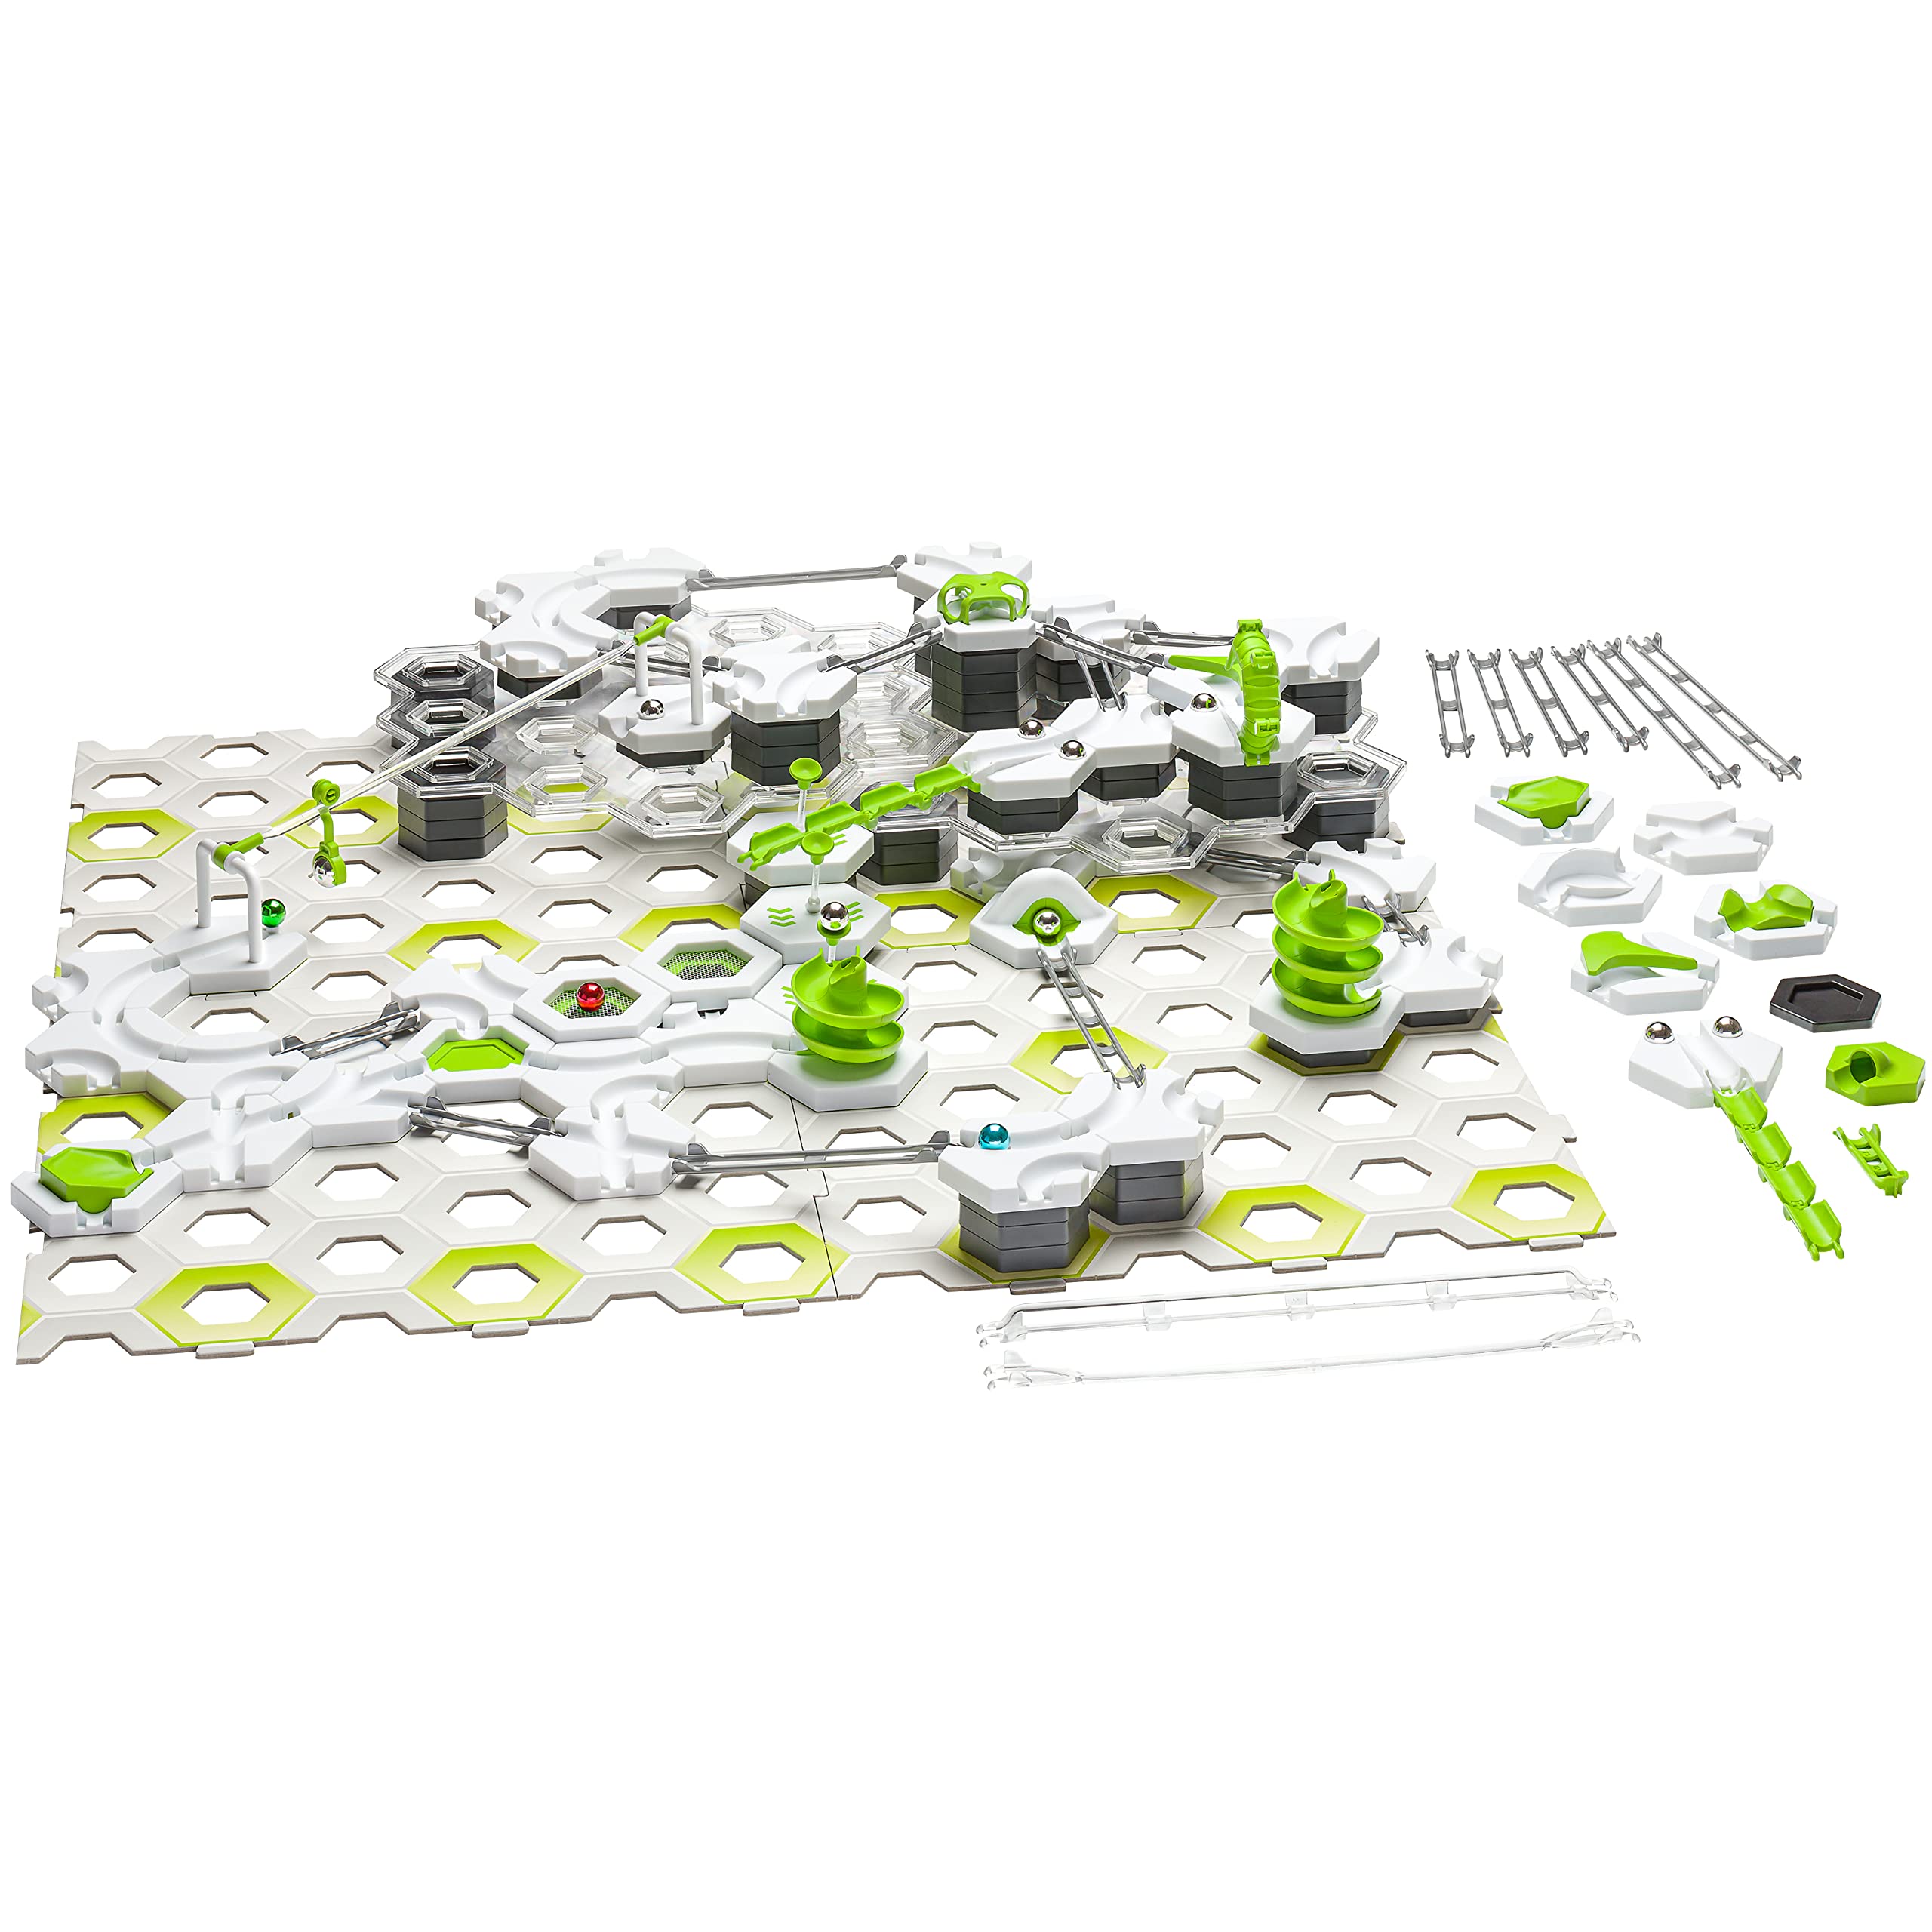 Ravensburger GraviTrax Obstacle Course Set - Marble Run and STEM Toy for Boys and Girls Age 8 and Up - 2019 Toy of The Year Finalist GraviTrax